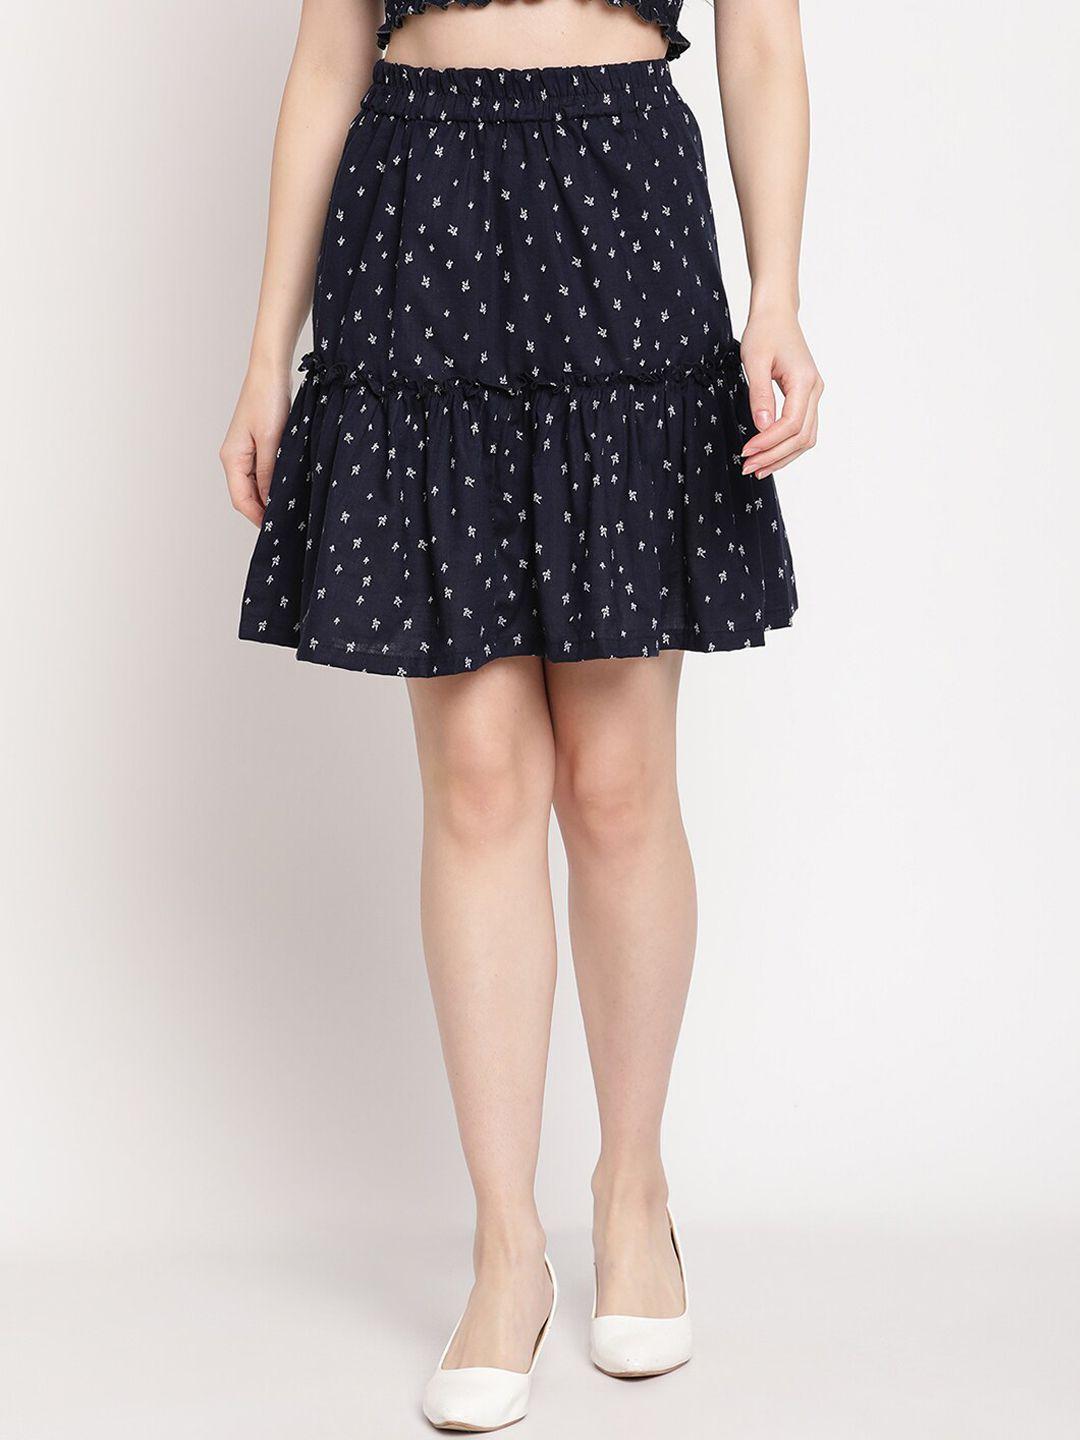 tag-7-women-navy-blue-&-white-printed-pure-cotton-tiered-skirts